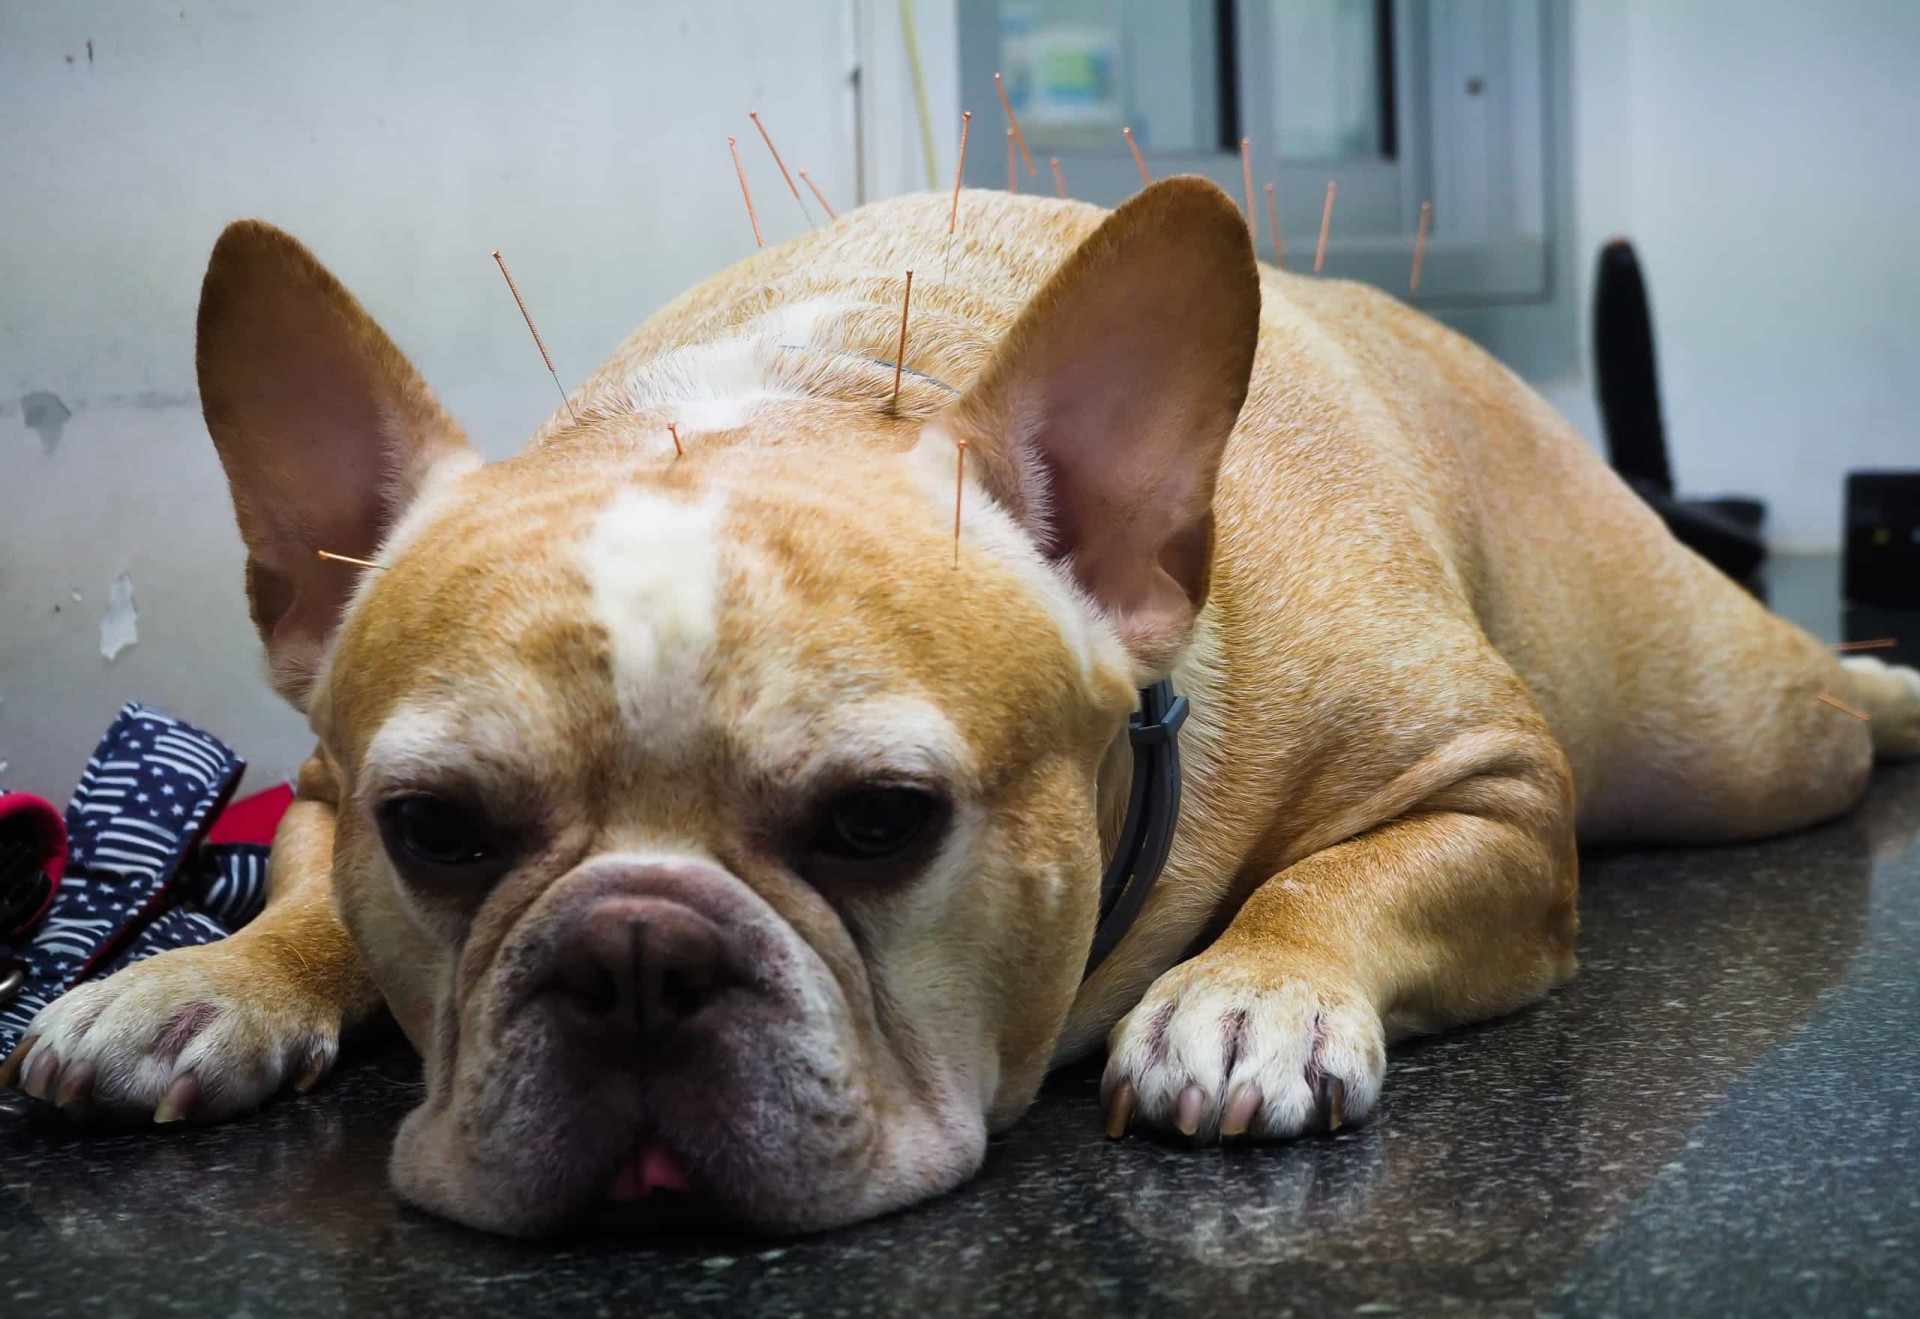 <p>Acupuncture can also be used on animals, such as dogs, cats, monkeys, horses, and cattle. It's usually used on dogs who suffer from arthritis and joint inflammation.</p><p>You may also like:<a href="https://www.starsinsider.com/n/375399?utm_source=msn.com&utm_medium=display&utm_campaign=referral_description&utm_content=509810en-us"> These male celebs all dye their hair</a></p>